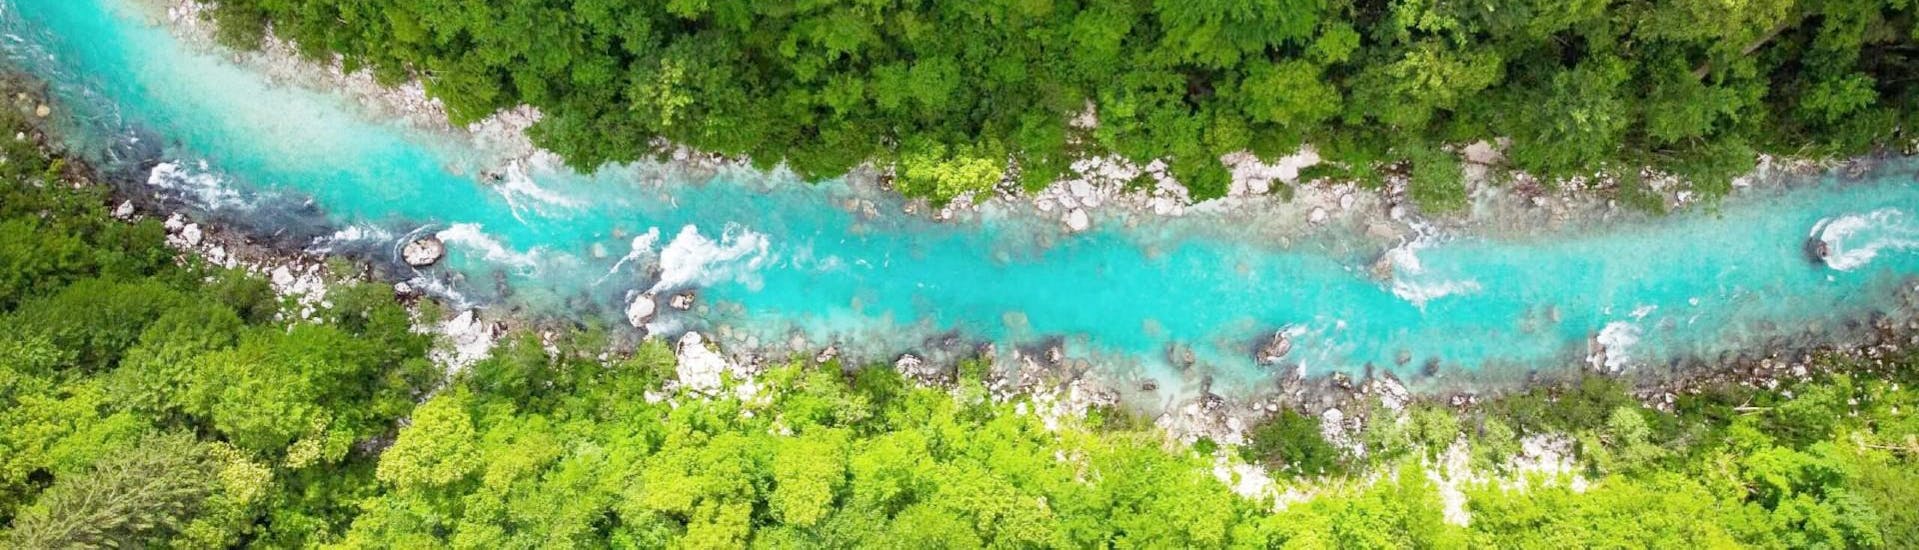 Aerial view of a river and its surrounding forest, ideal for a canyoning trip.